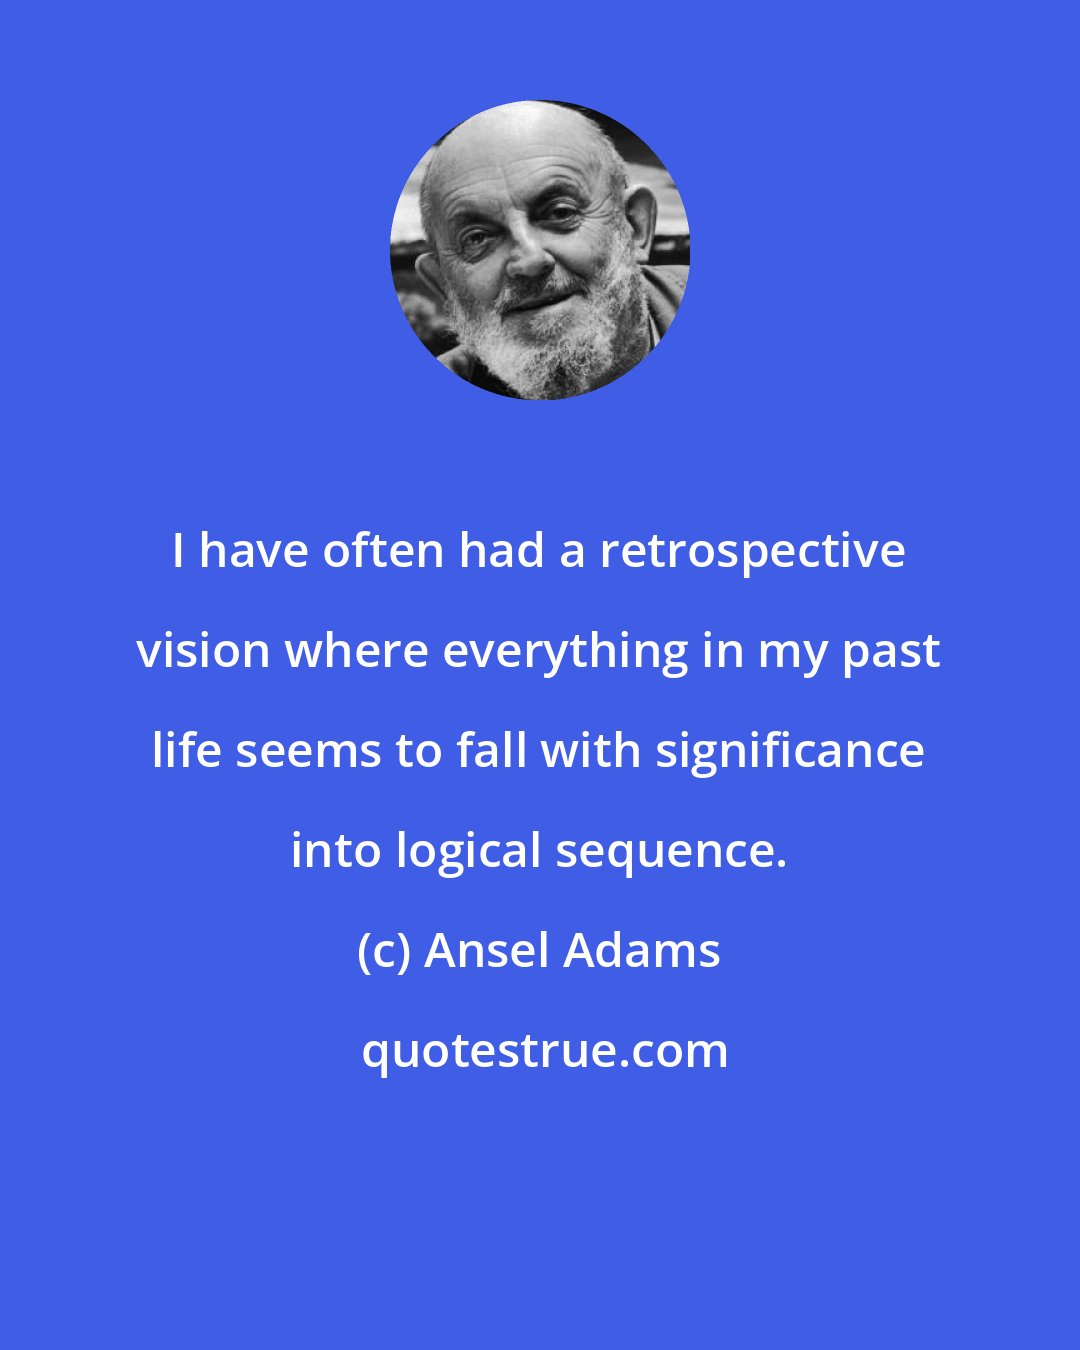 Ansel Adams: I have often had a retrospective vision where everything in my past life seems to fall with significance into logical sequence.